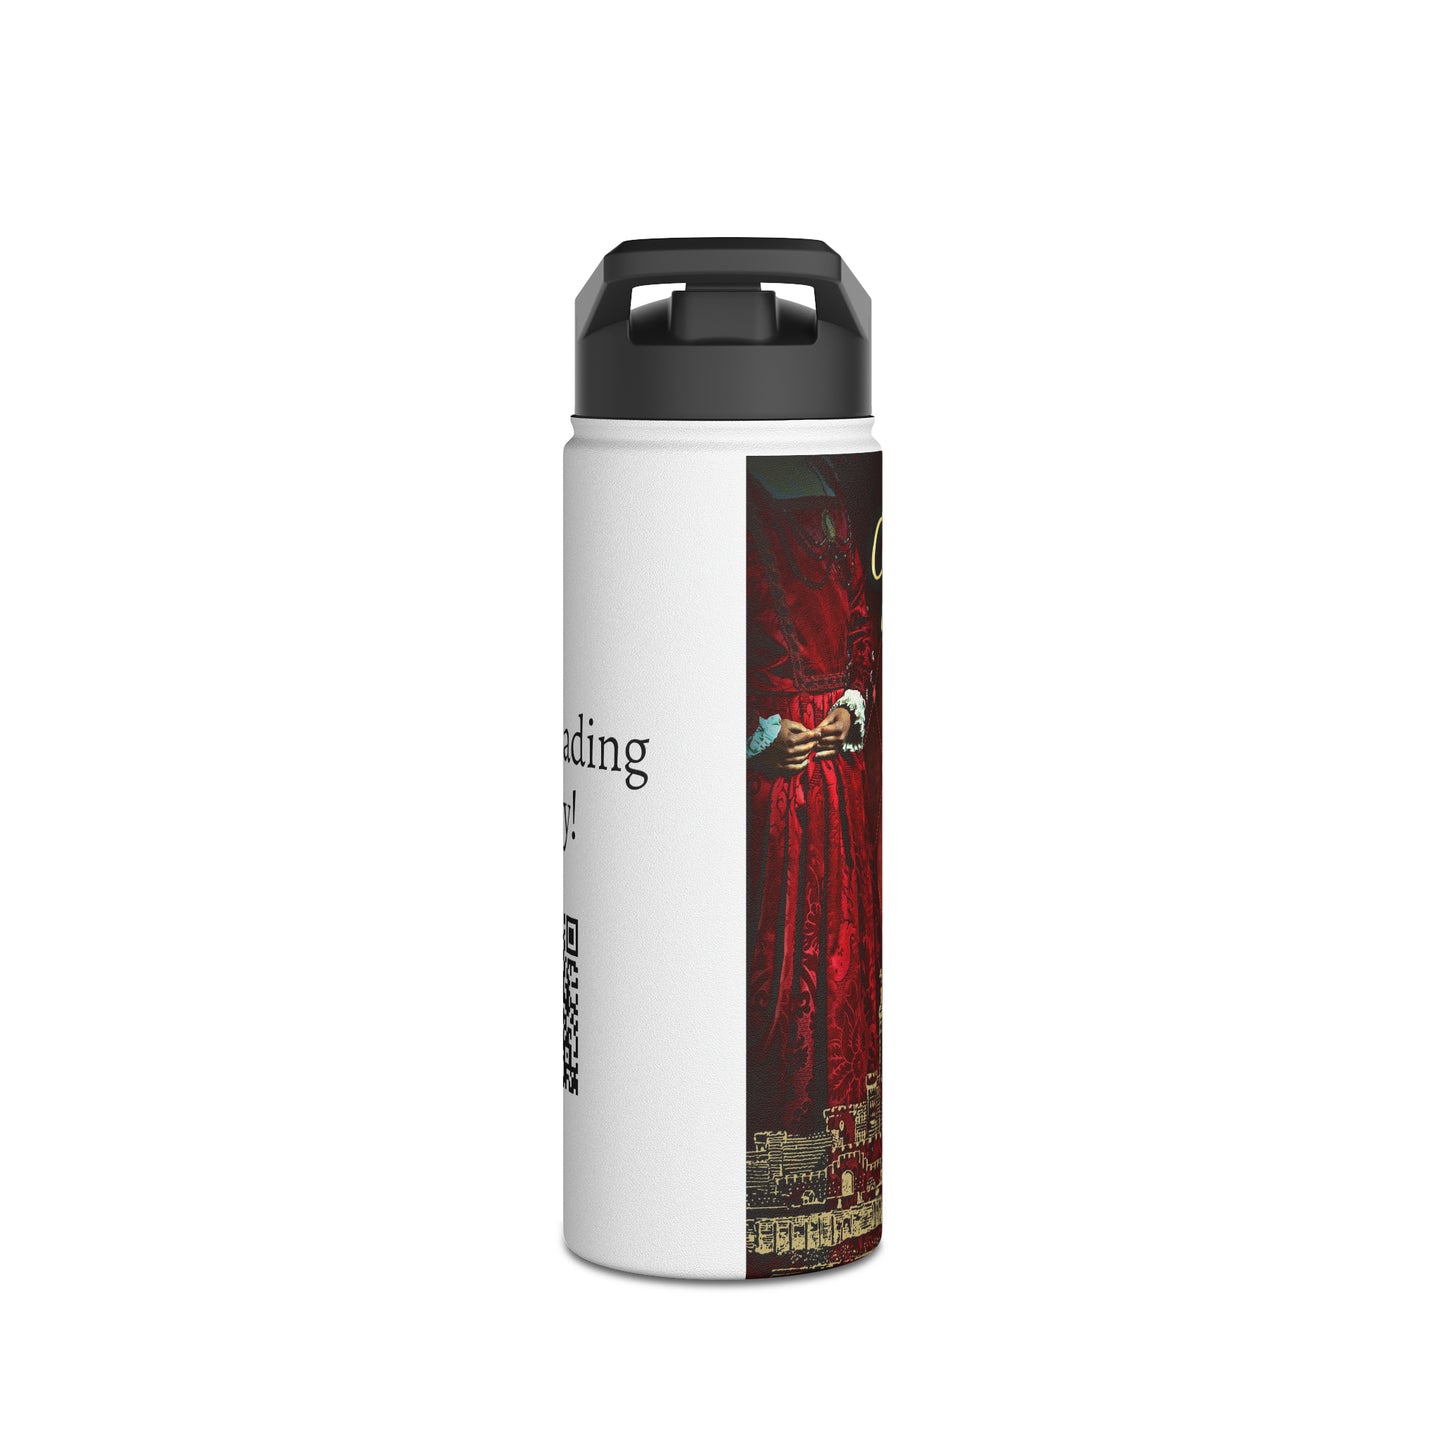 The Other Side Of Silence - Stainless Steel Water Bottle